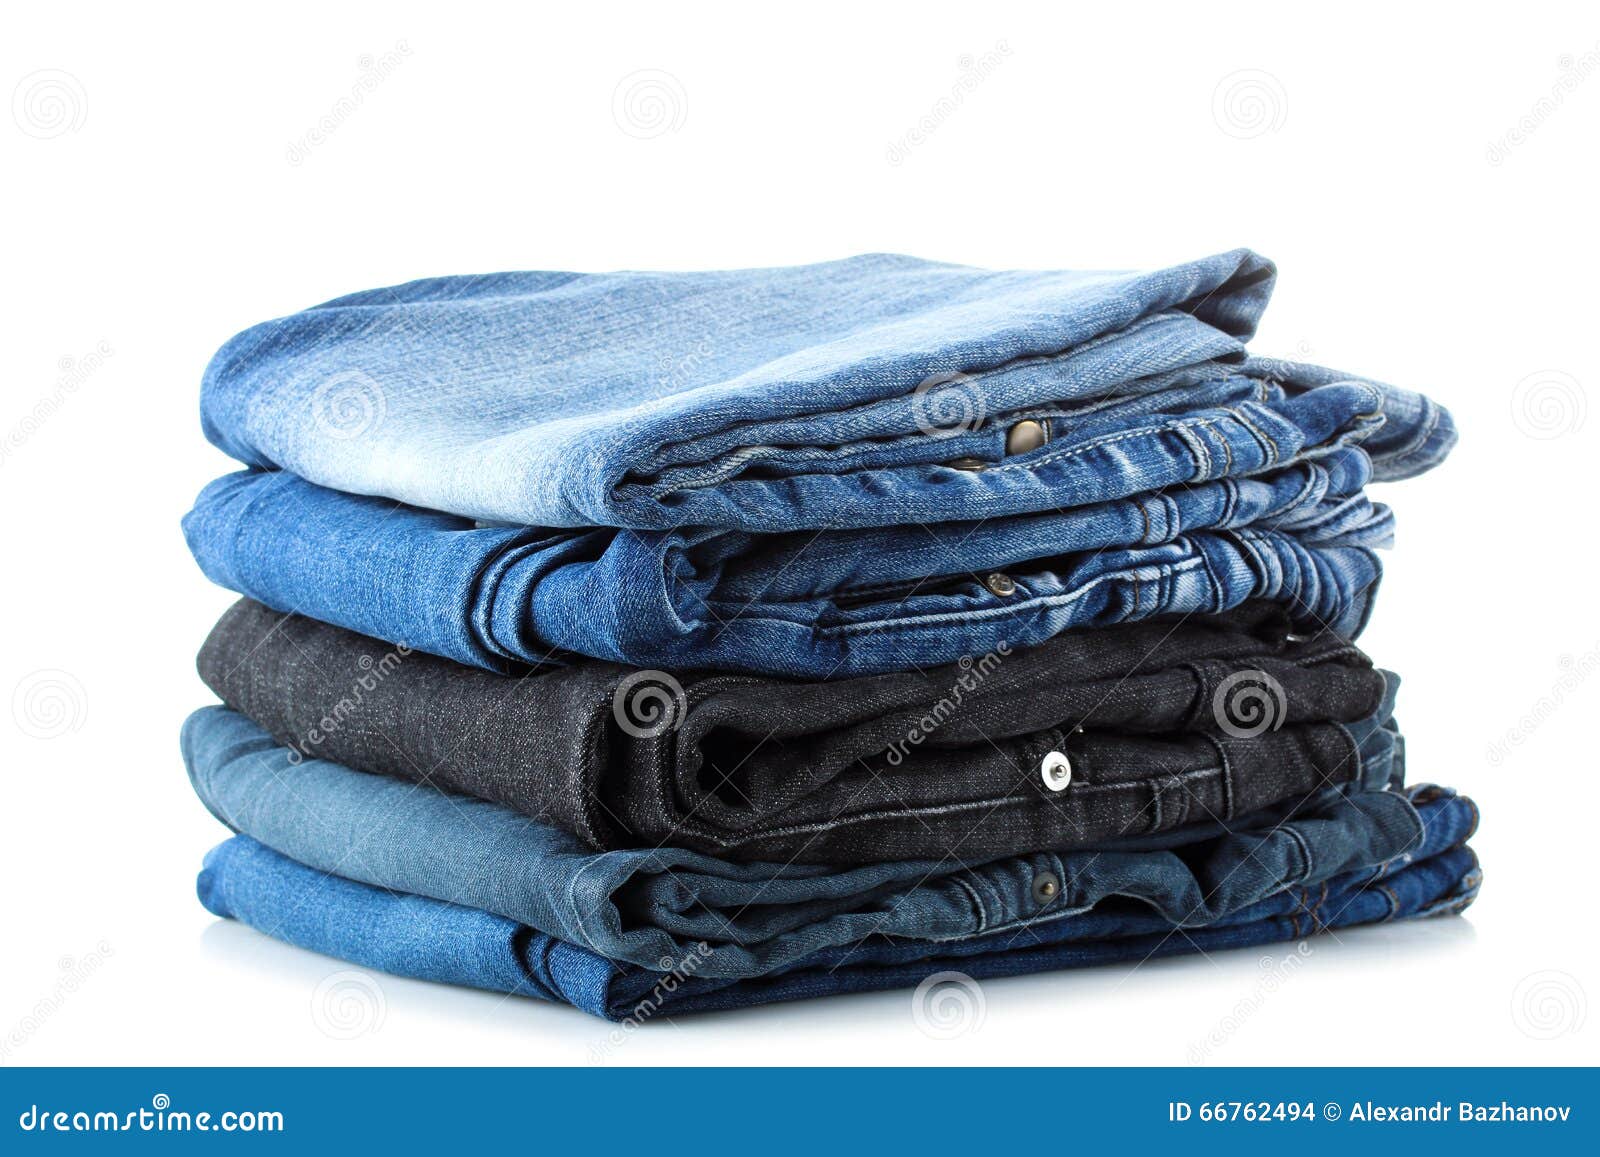 Stack of jeans stock photo. Image of fashion, button - 66762494